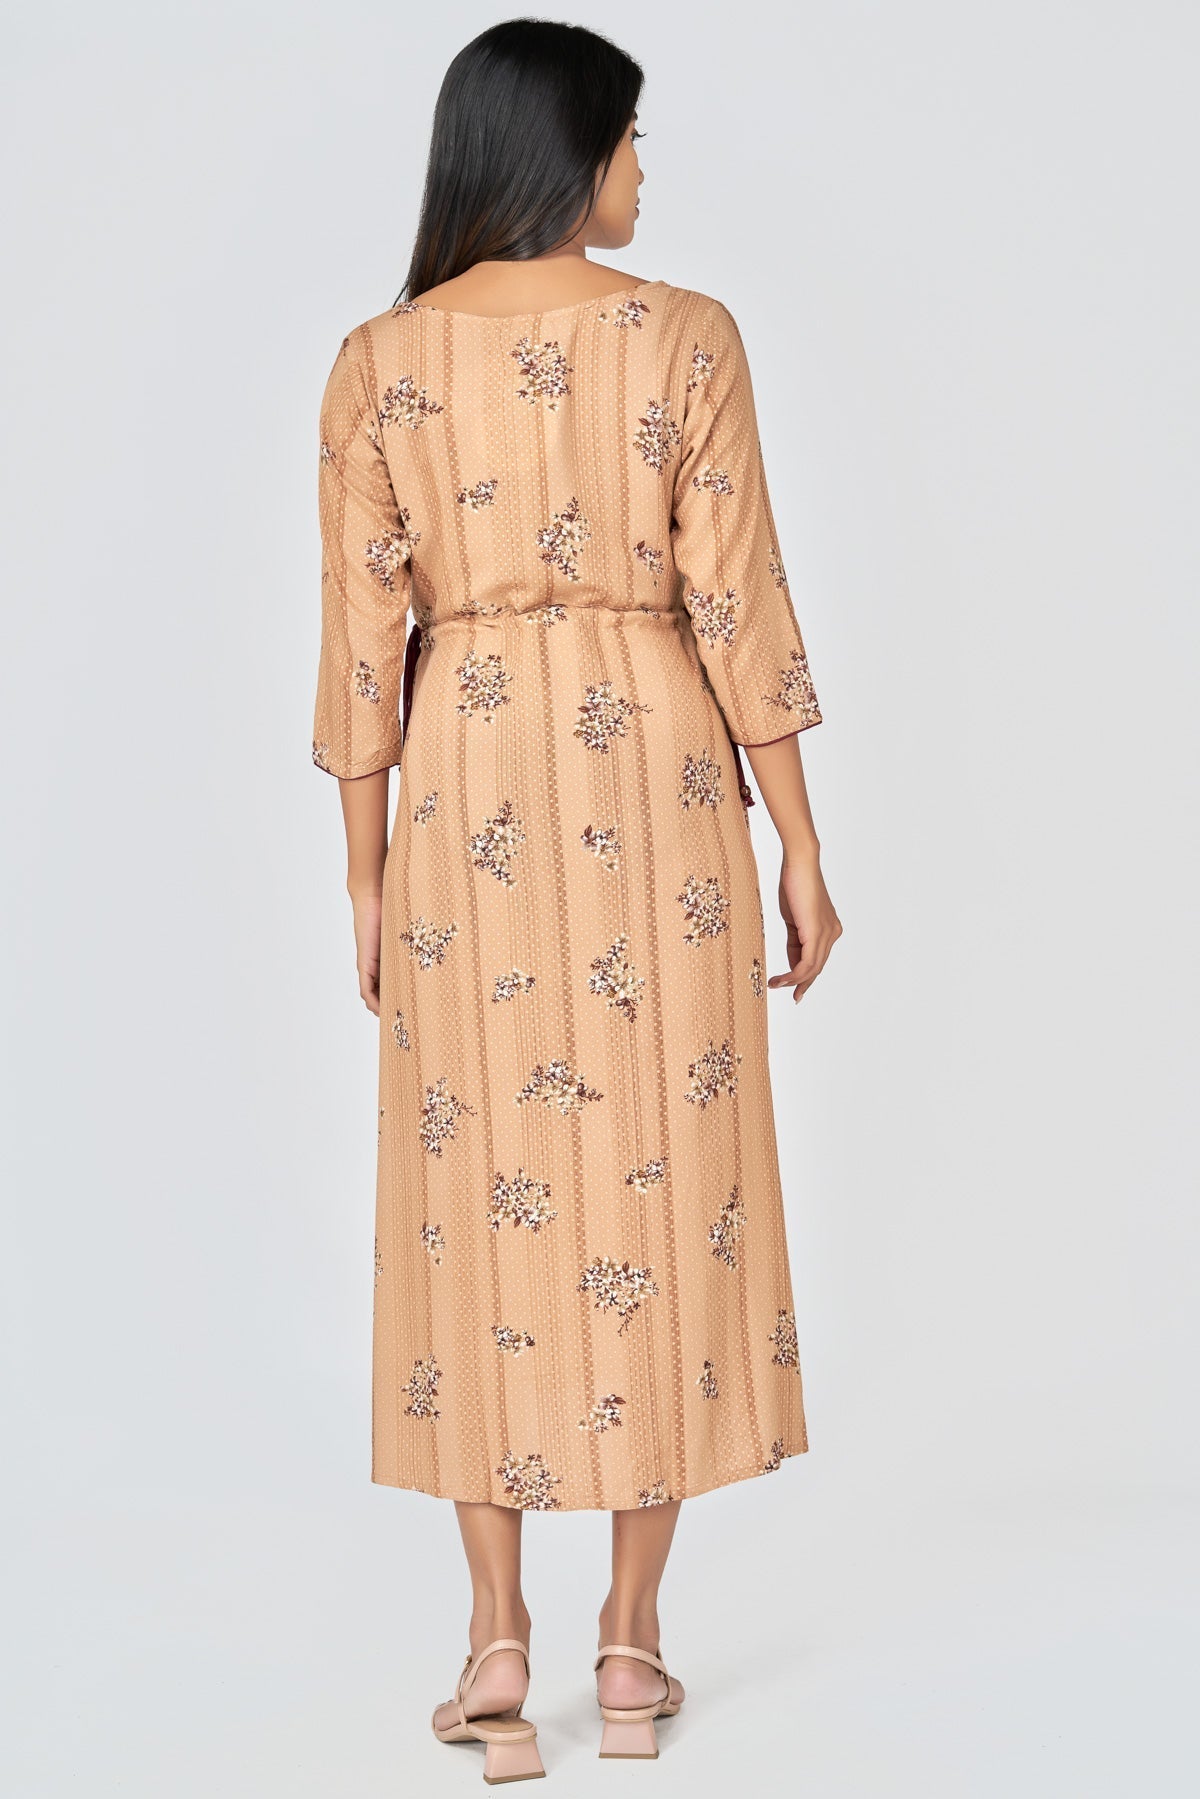 Floral & Dotted Print Maternity Long Dress - Beige